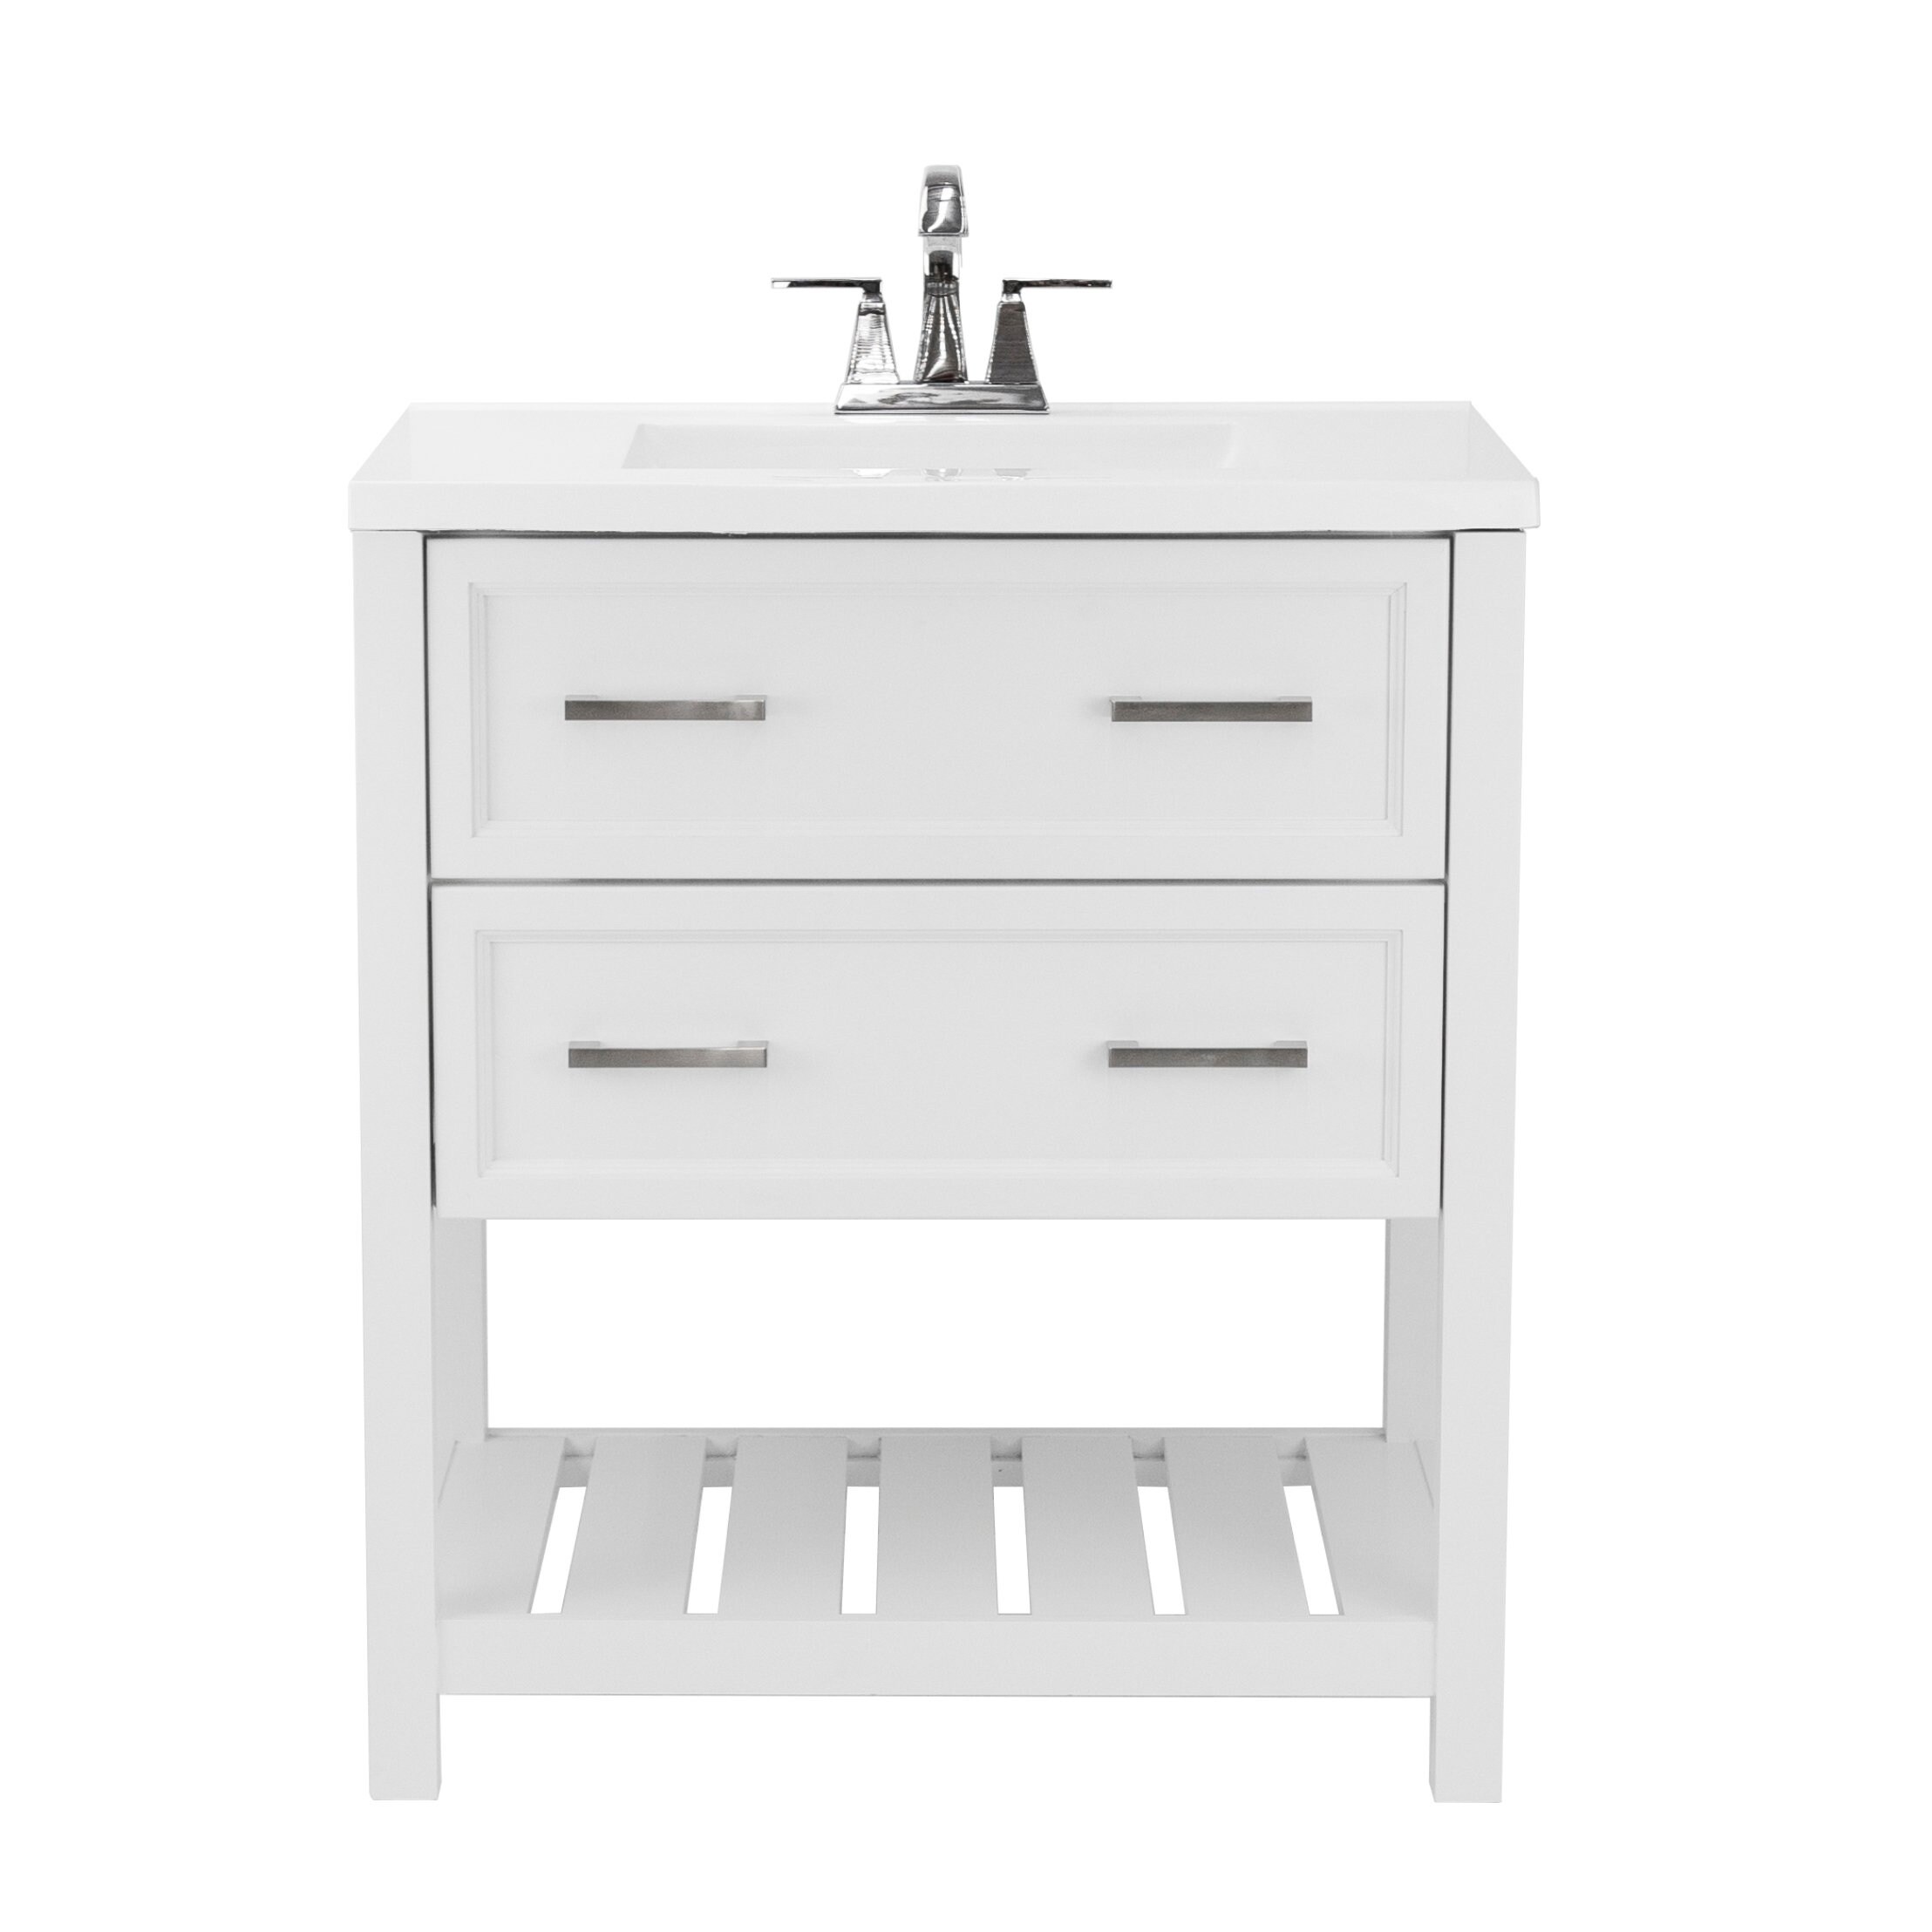 Milan 31 In Bath Vanity With Cultured Marble Vanity Top Overstock 30429595 Carrara Marble Top With Backsplash White 31 Inch